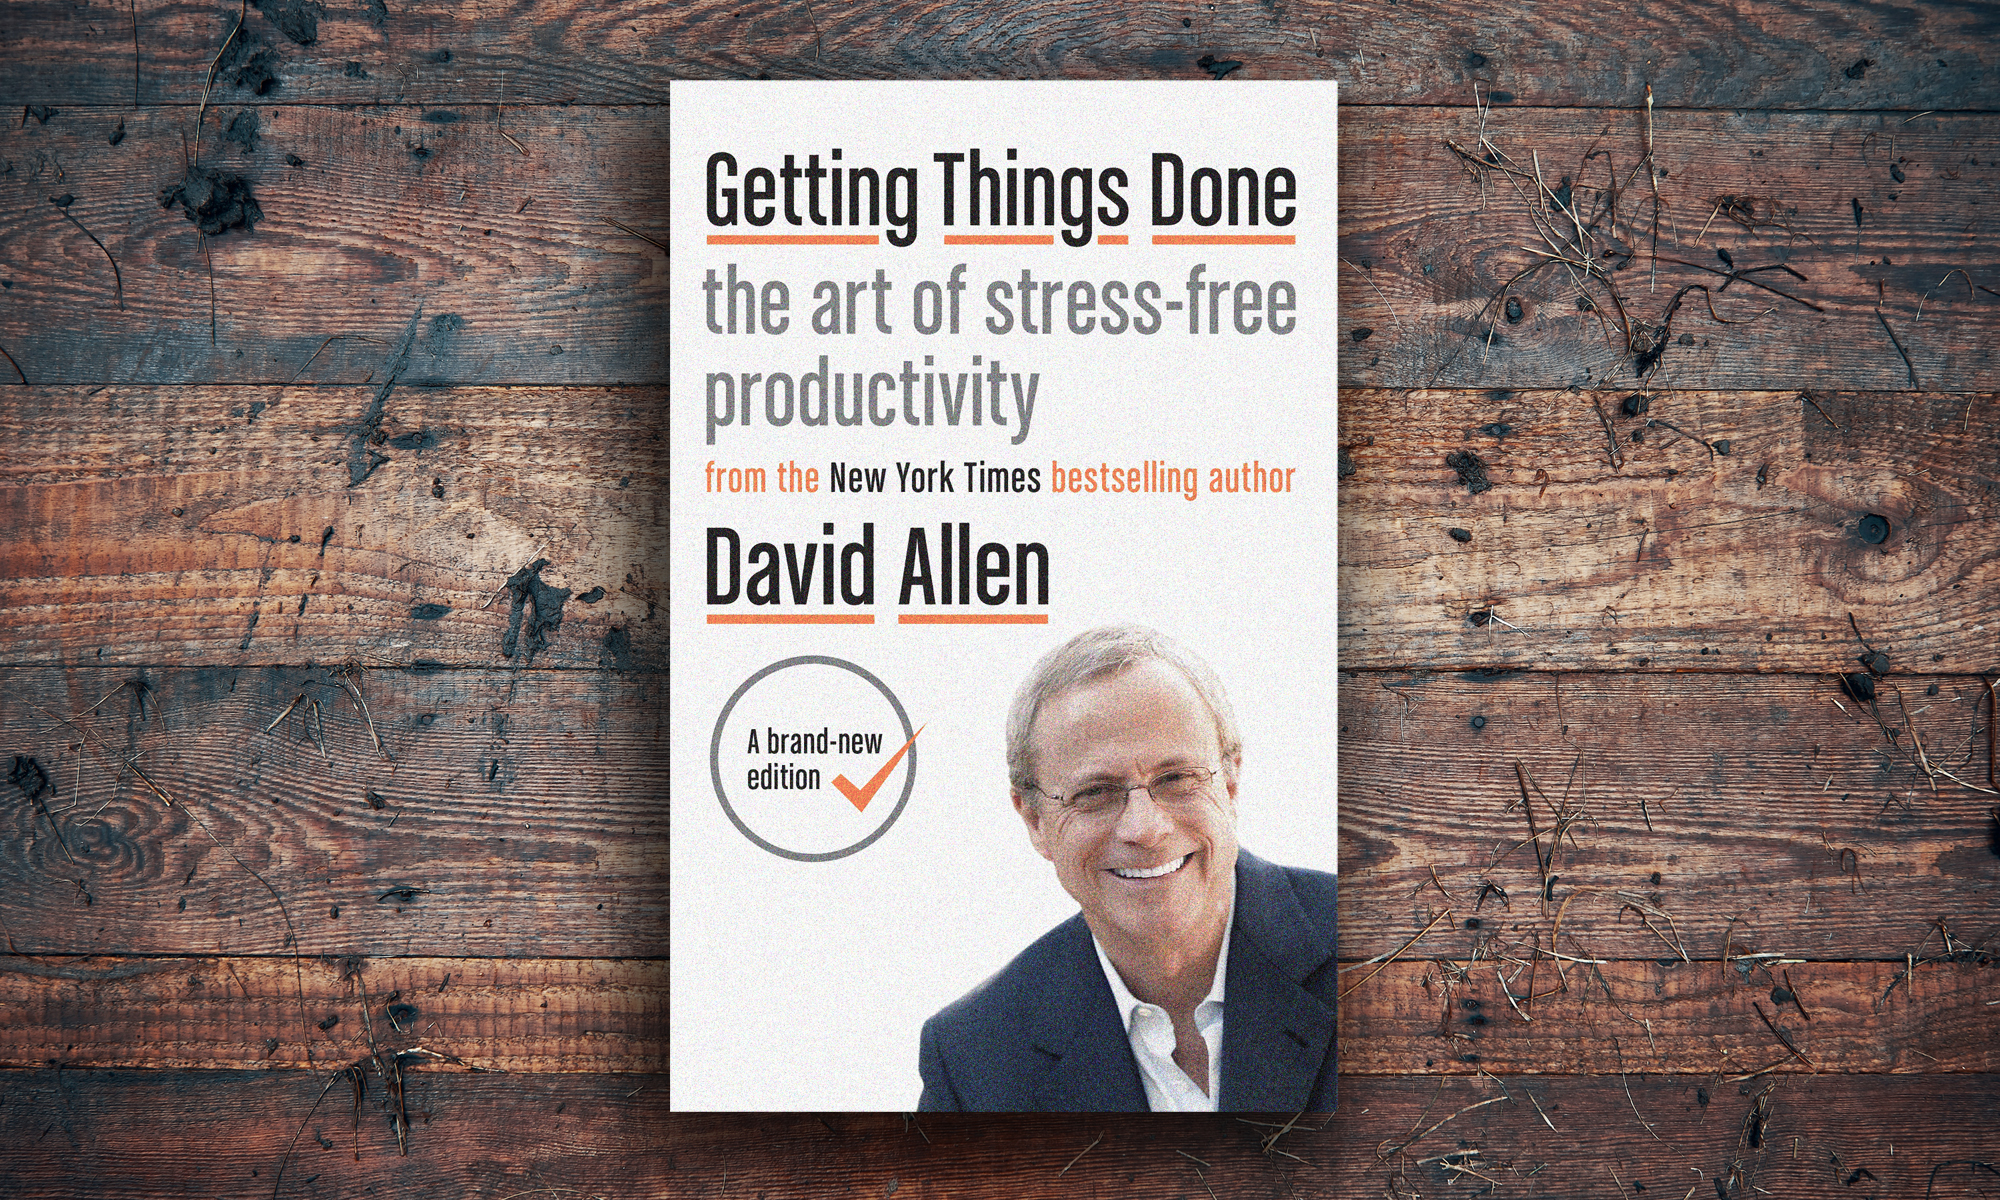 Cover of the book "Getting Things Done" by David Allen